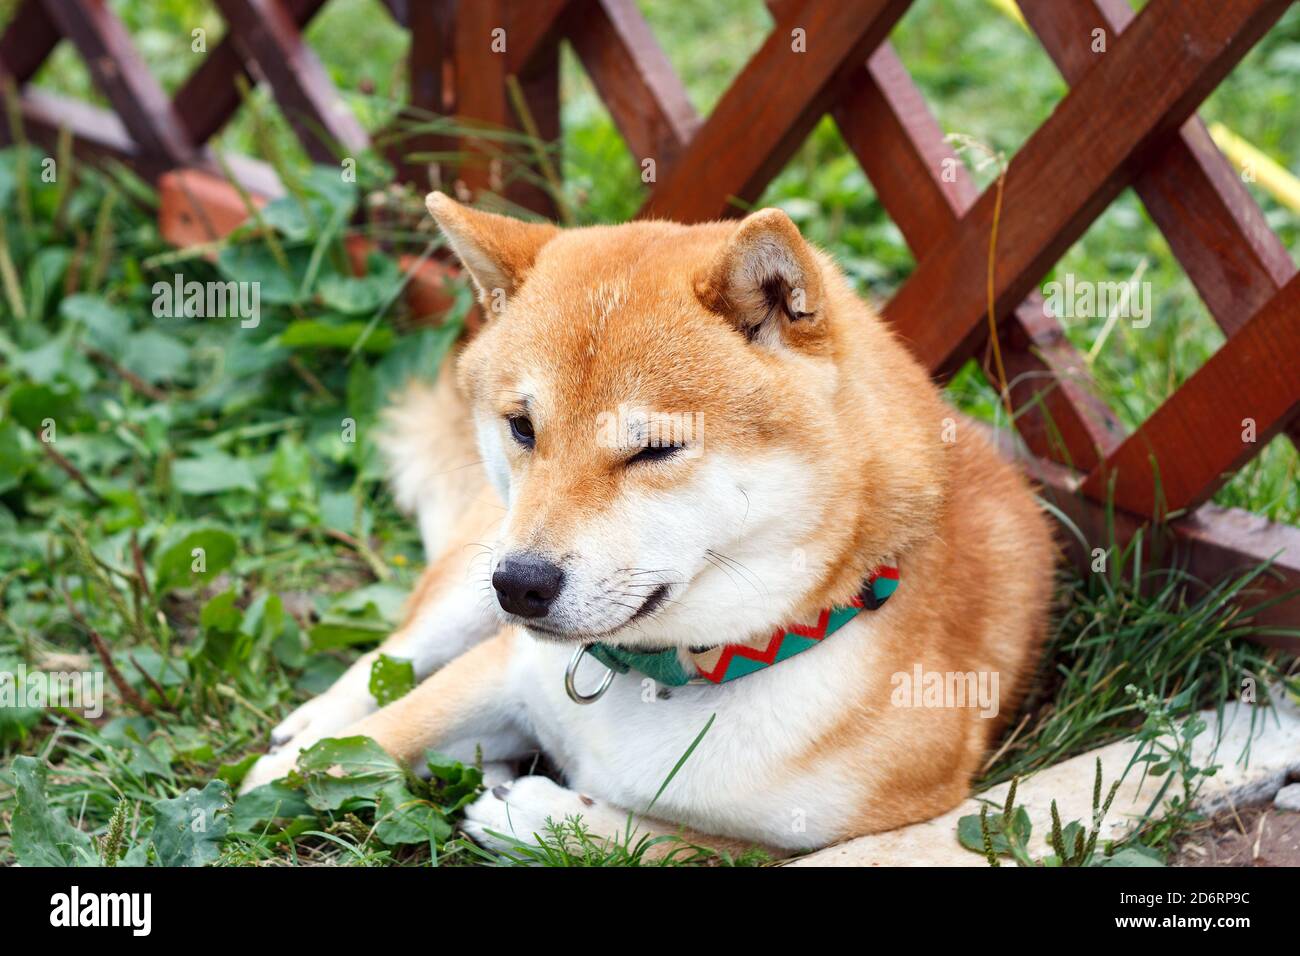 Japanese dog of Shiba Inu breed lying on a sunny summer day. Japanese Small Size Dog Shiba Ken rest on the green grass Stock Photo